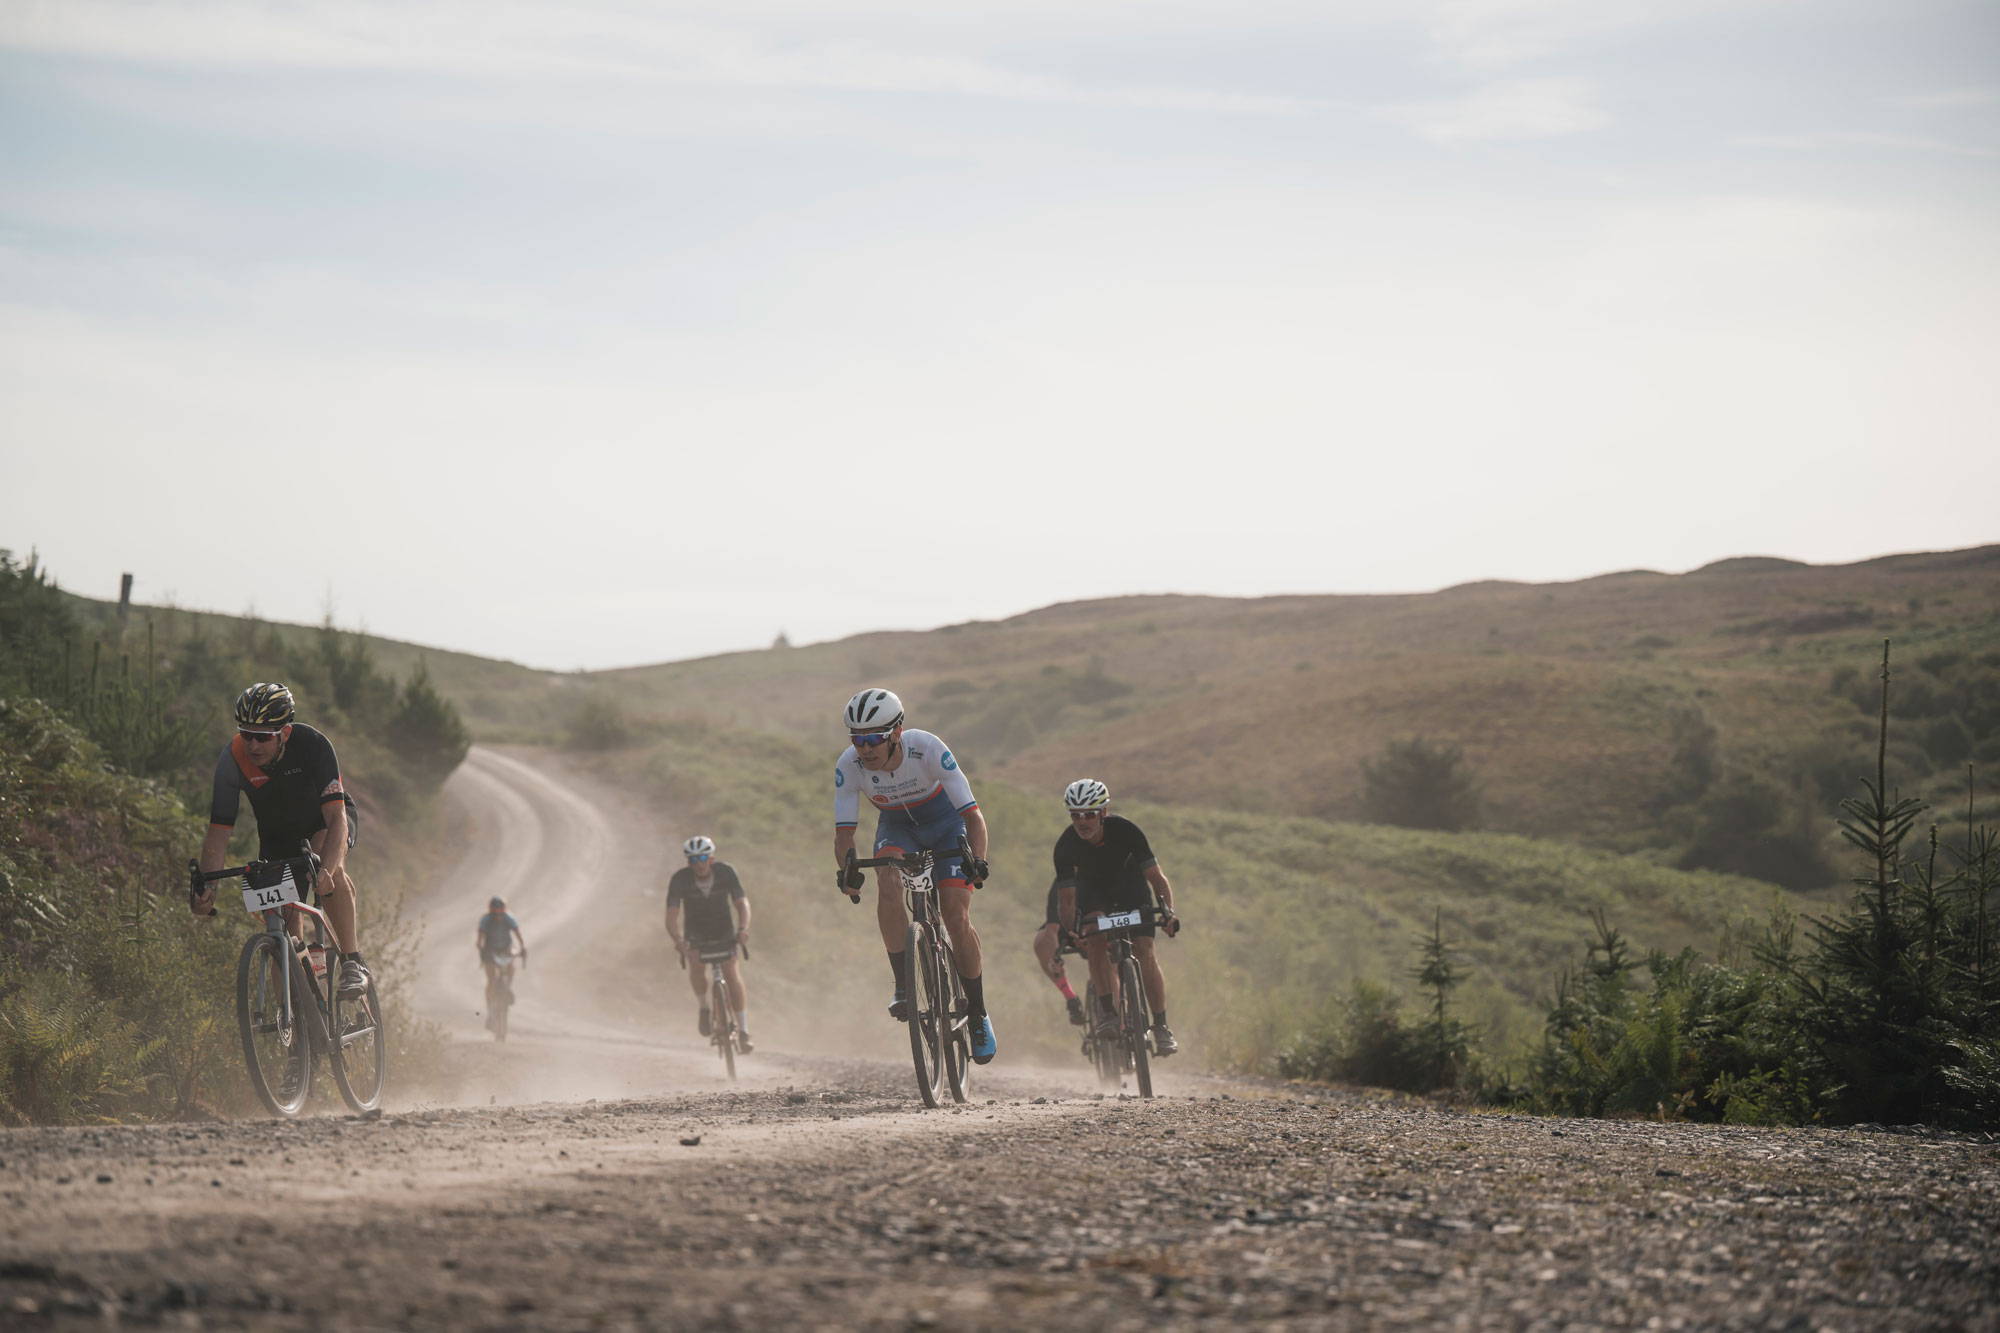 Bunch of gravel cyclists racing